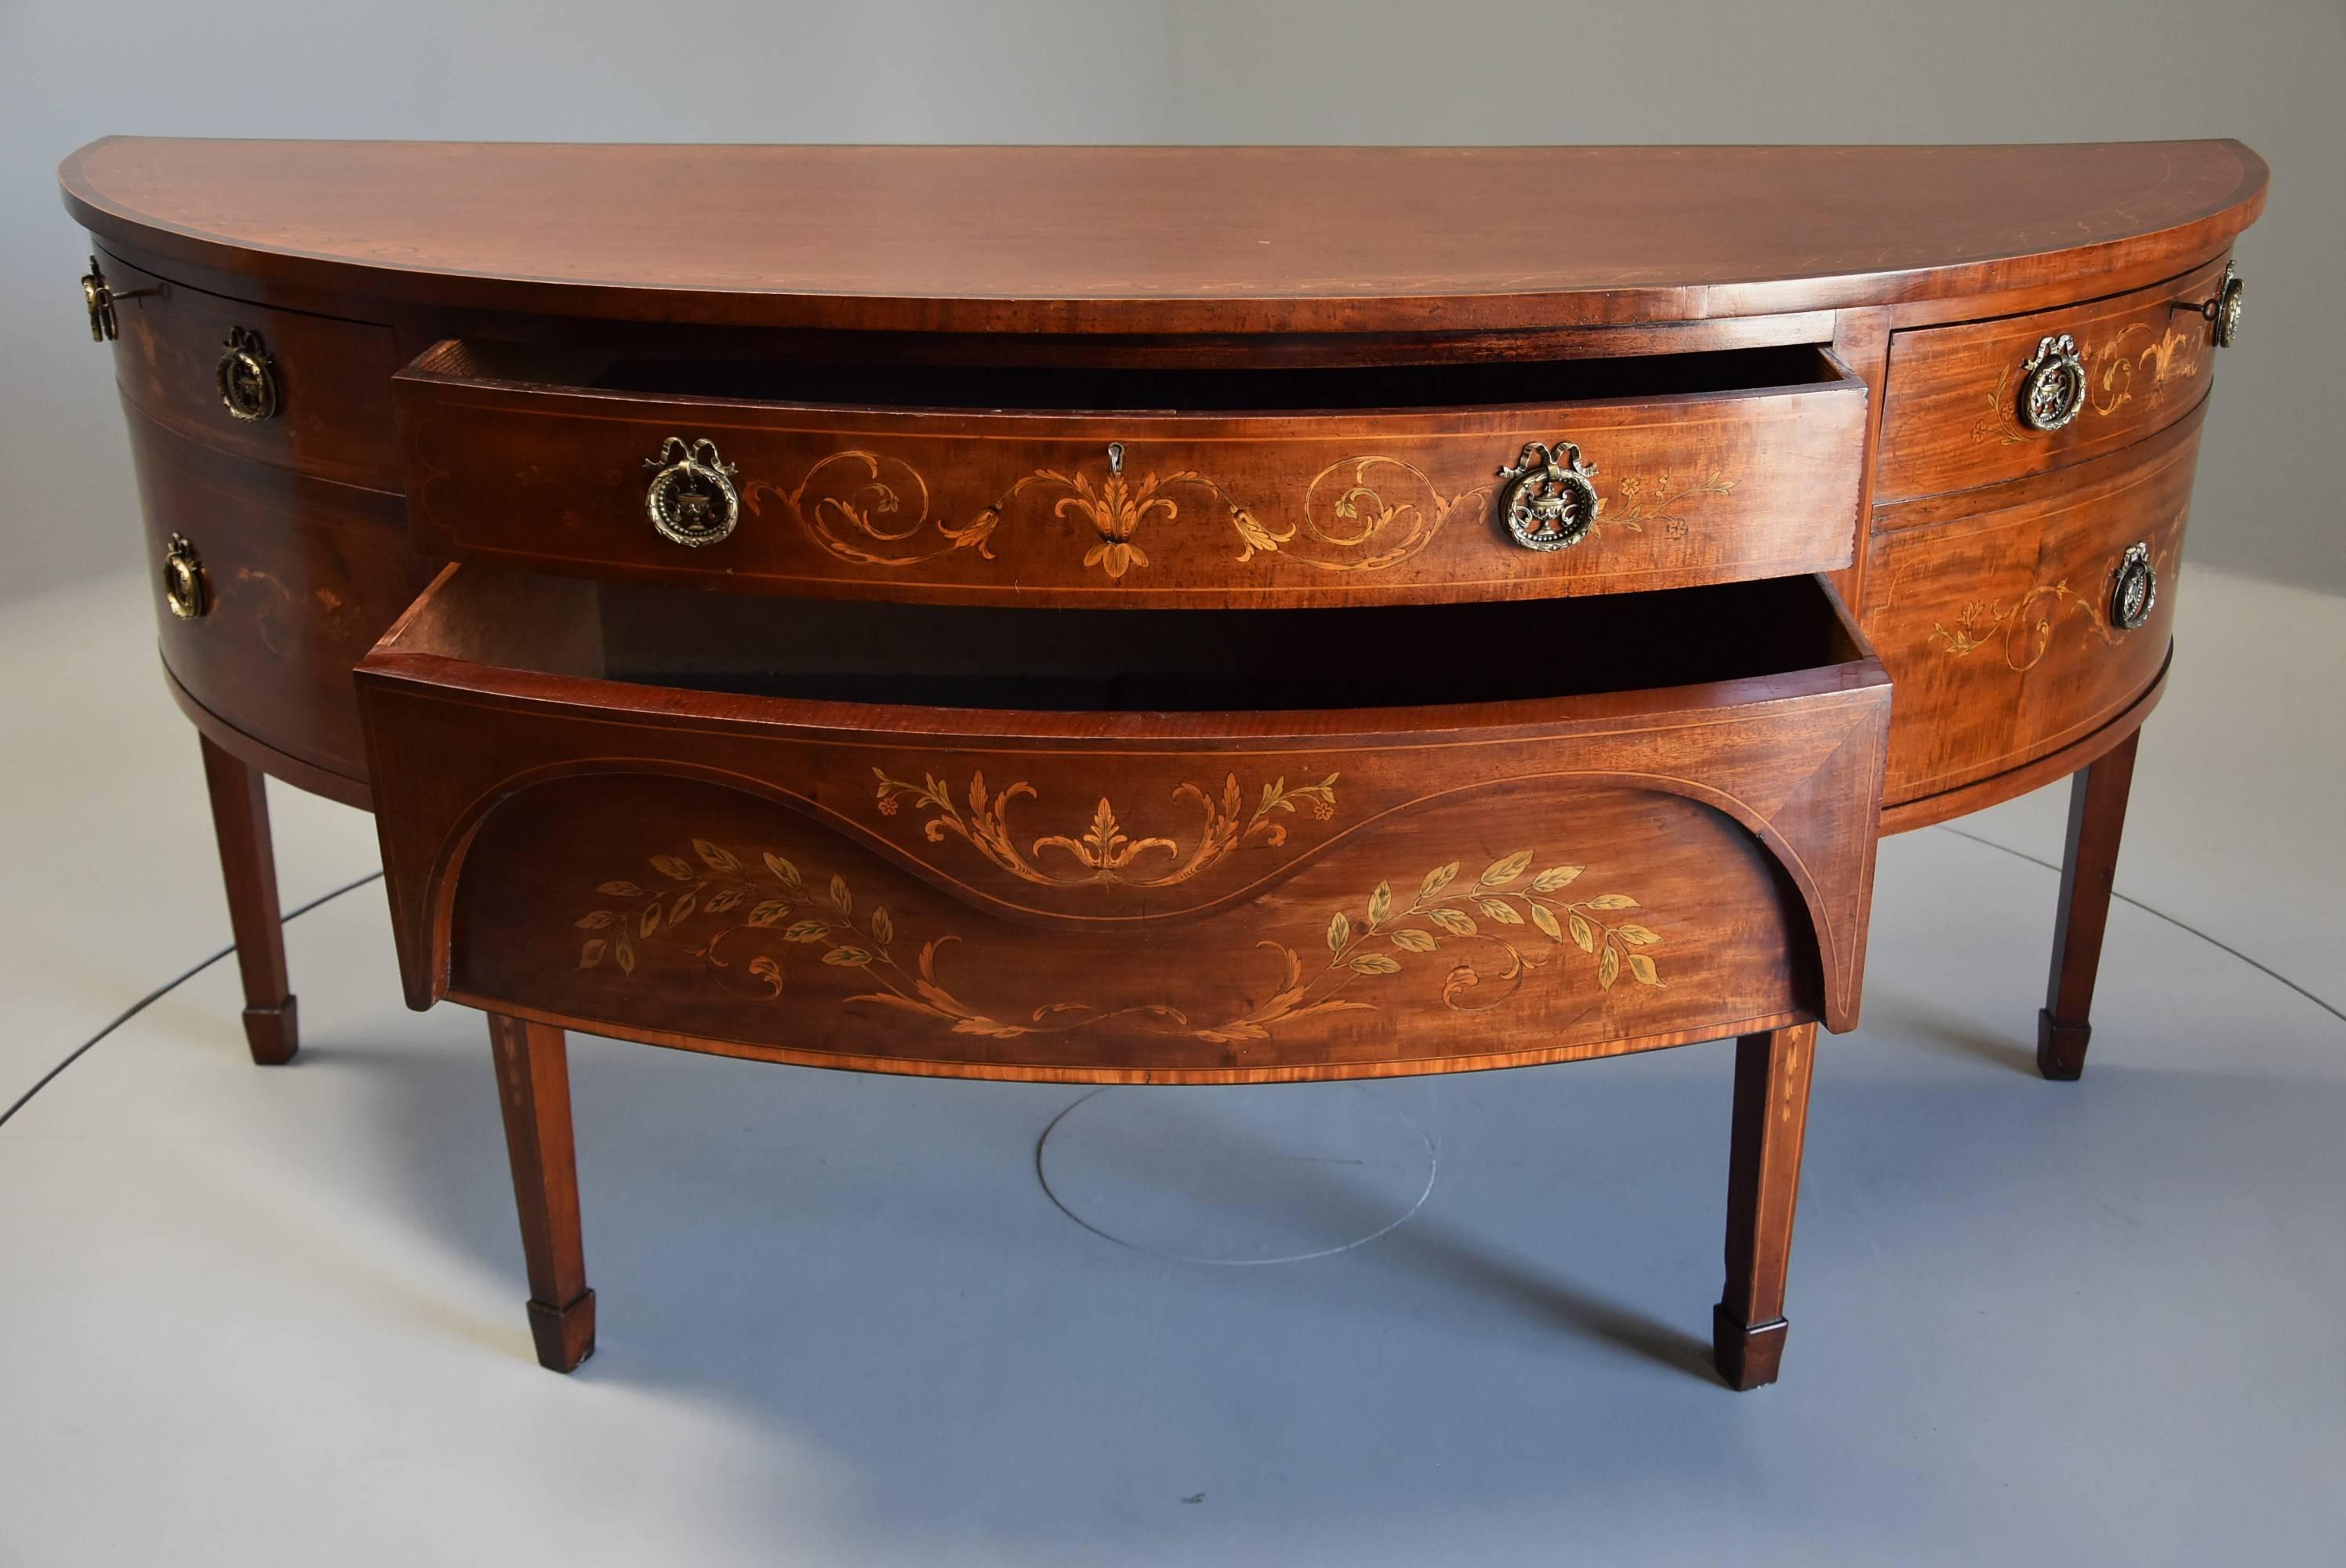 Great Britain (UK) Fine Quality Edwardian Mahogany & Inlaid Bow Front Sideboard by Druce & Co